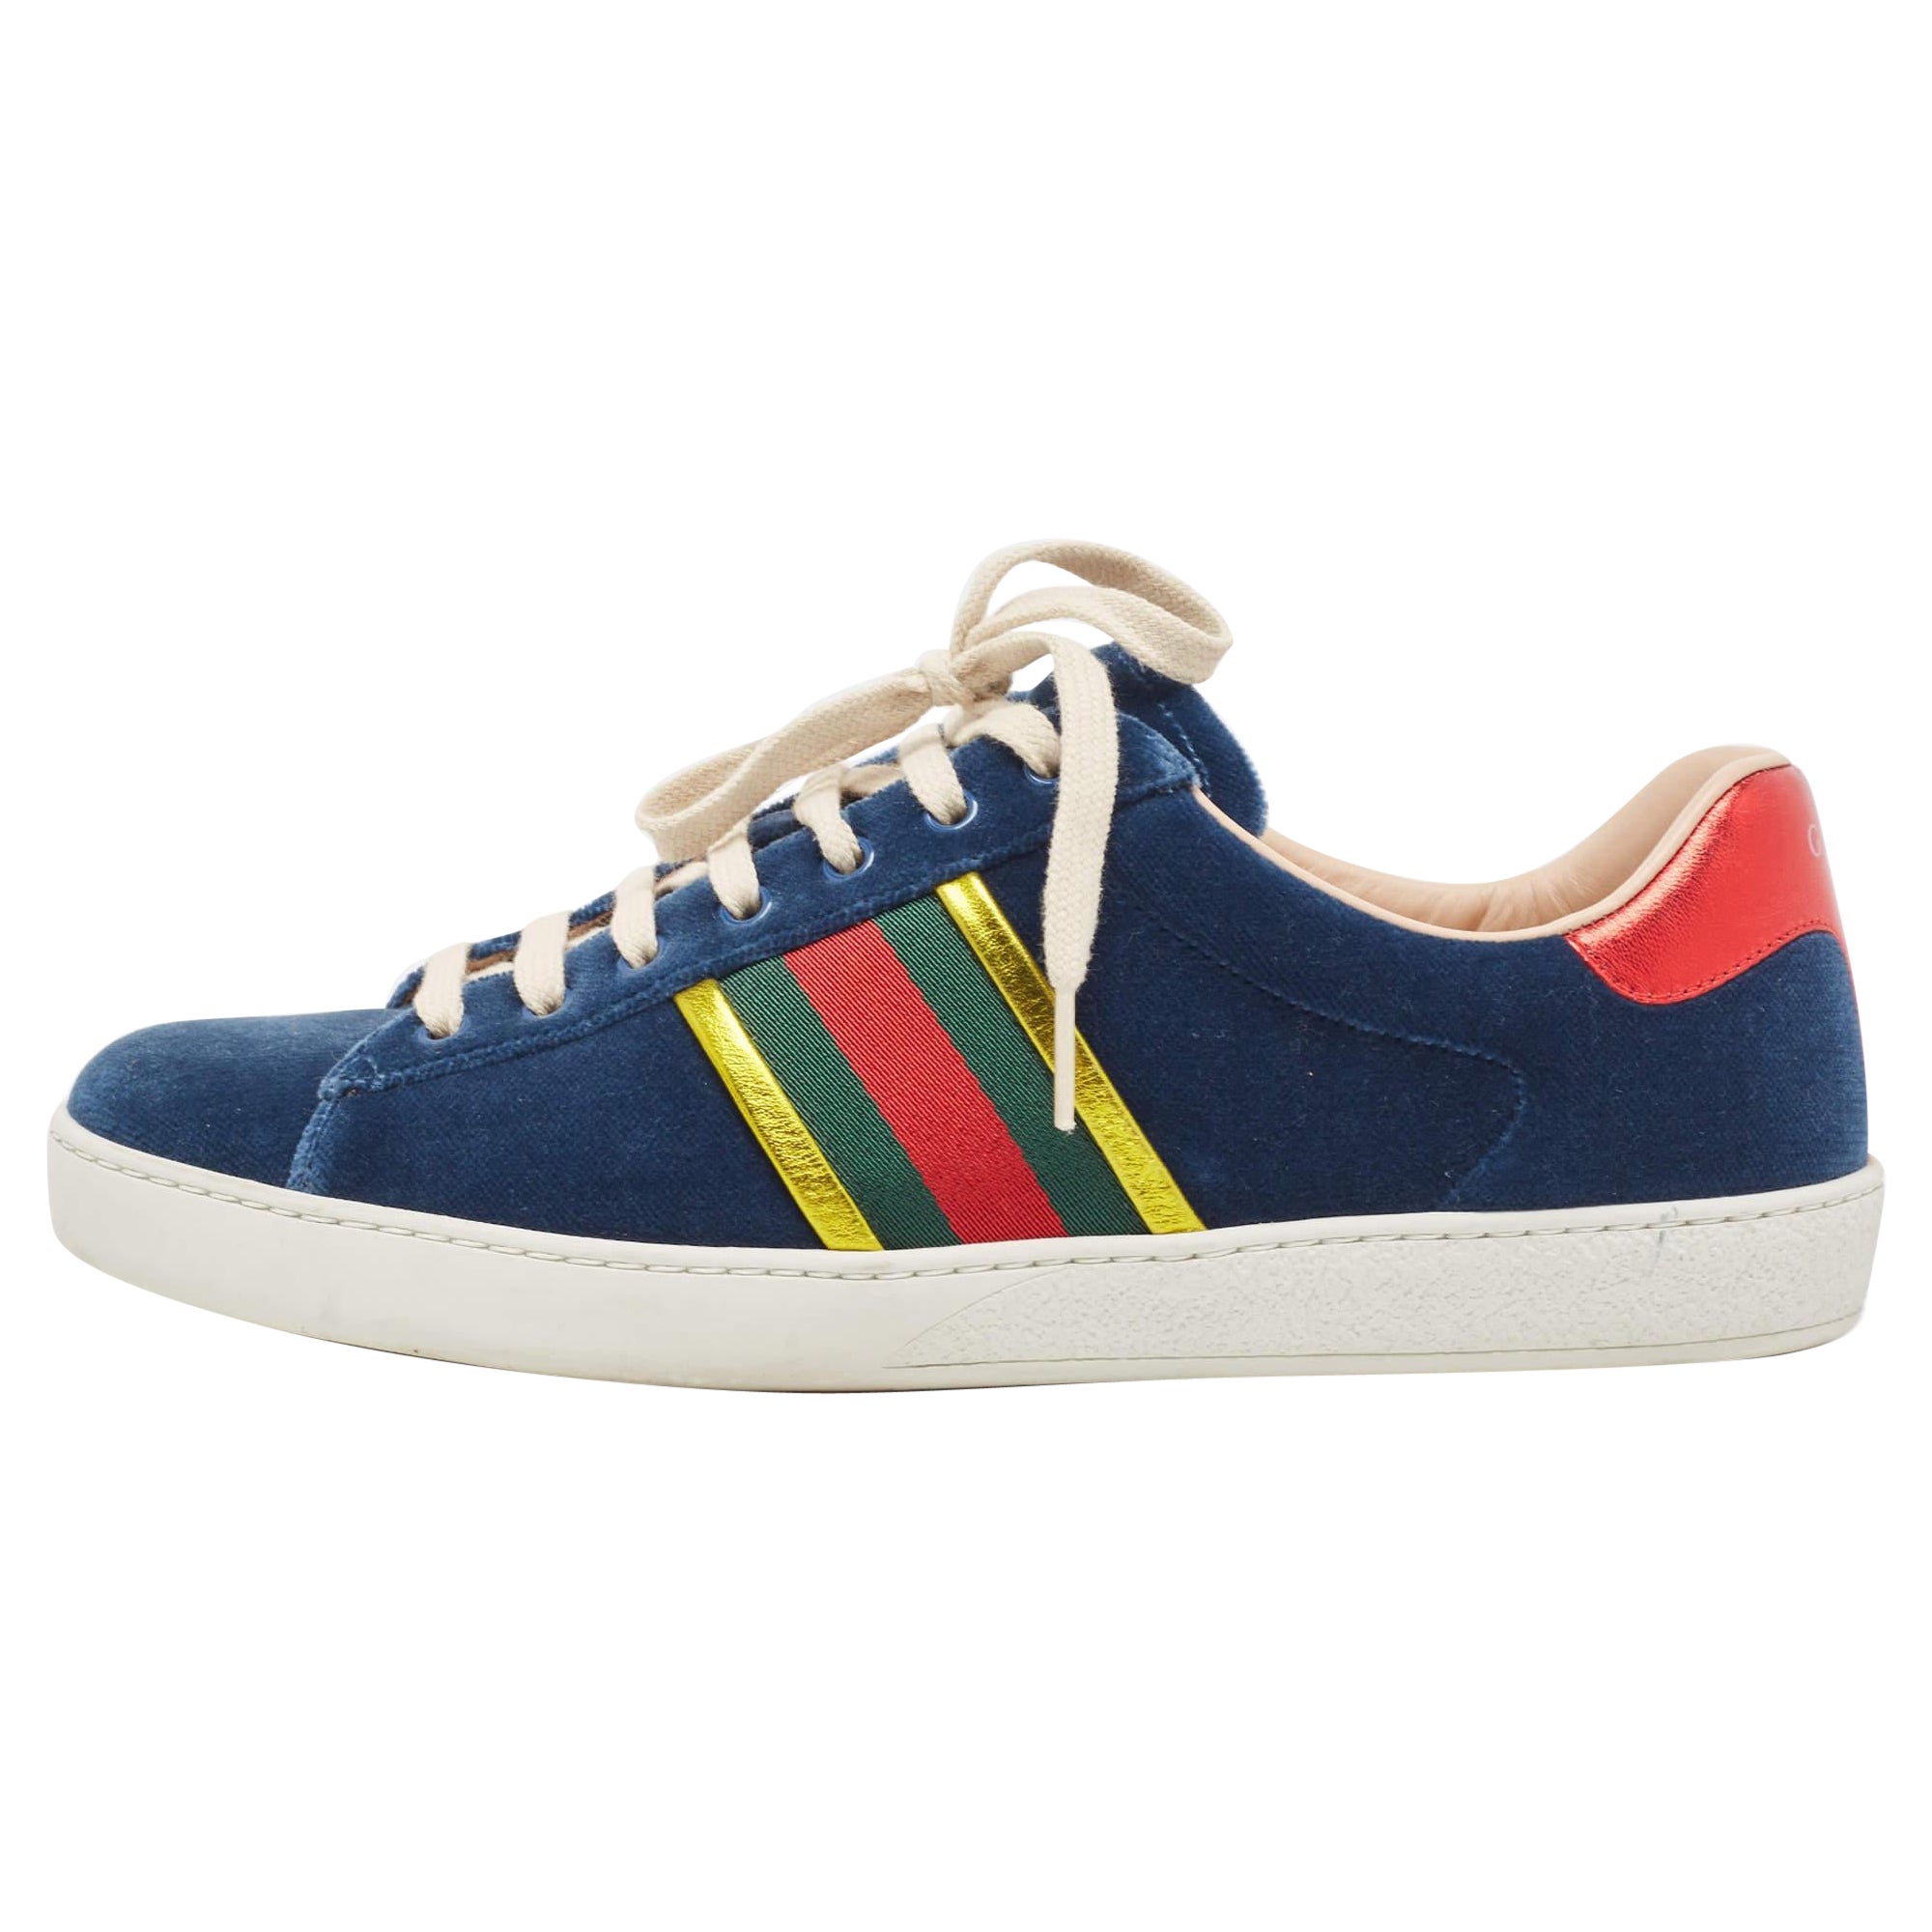 Gucci Blue Velvet And Foil Leather Web Detail Ace Sneakers Size 42.5 For Sale